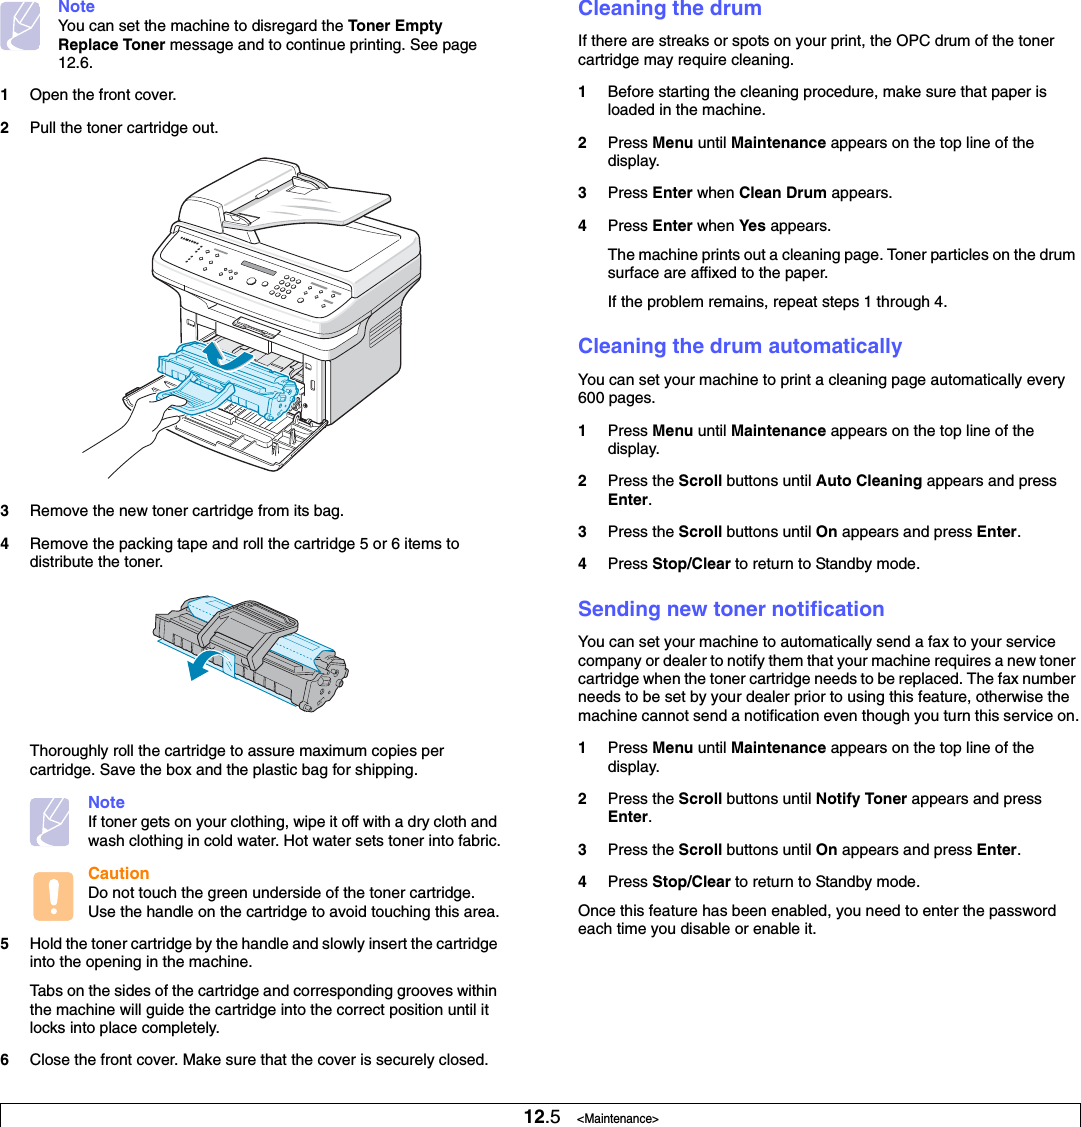 12.5   &lt;Maintenance&gt;NoteYou can set the machine to disregard the Toner EmptyReplace Toner message and to continue printing. See page 12.6.1Open the front cover.2Pull the toner cartridge out.3Remove the new toner cartridge from its bag. 4Remove the packing tape and roll the cartridge 5 or 6 items to distribute the toner.Thoroughly roll the cartridge to assure maximum copies per cartridge. Save the box and the plastic bag for shipping.NoteIf toner gets on your clothing, wipe it off with a dry cloth and wash clothing in cold water. Hot water sets toner into fabric.CautionDo not touch the green underside of the toner cartridge. Use the handle on the cartridge to avoid touching this area.5Hold the toner cartridge by the handle and slowly insert the cartridge into the opening in the machine. Tabs on the sides of the cartridge and corresponding grooves within the machine will guide the cartridge into the correct position until it locks into place completely.6Close the front cover. Make sure that the cover is securely closed.Cleaning the drumIf there are streaks or spots on your print, the OPC drum of the toner cartridge may require cleaning.1Before starting the cleaning procedure, make sure that paper is loaded in the machine. 2Press Menu until Maintenance appears on the top line of the display.3Press Enter when Clean Drum appears.4Press Enter when Yes appears.The machine prints out a cleaning page. Toner particles on the drum surface are affixed to the paper. If the problem remains, repeat steps 1 through 4.Cleaning the drum automaticallyYou can set your machine to print a cleaning page automatically every 600 pages.1Press Menu until Maintenance appears on the top line of the display.2Press the Scroll buttons until Auto Cleaning appears and press Enter.3Press the Scroll buttons until On appears and press Enter.4Press Stop/Clear to return to Standby mode.Sending new toner notificationYou can set your machine to automatically send a fax to your service company or dealer to notify them that your machine requires a new toner cartridge when the toner cartridge needs to be replaced. The fax number needs to be set by your dealer prior to using this feature, otherwise the machine cannot send a notification even though you turn this service on.1Press Menu until Maintenance appears on the top line of the display.2Press the Scroll buttons until Notify Toner appears and press Enter.3Press the Scroll buttons until On appears and press Enter.4Press Stop/Clear to return to Standby mode.Once this feature has been enabled, you need to enter the password each time you disable or enable it.